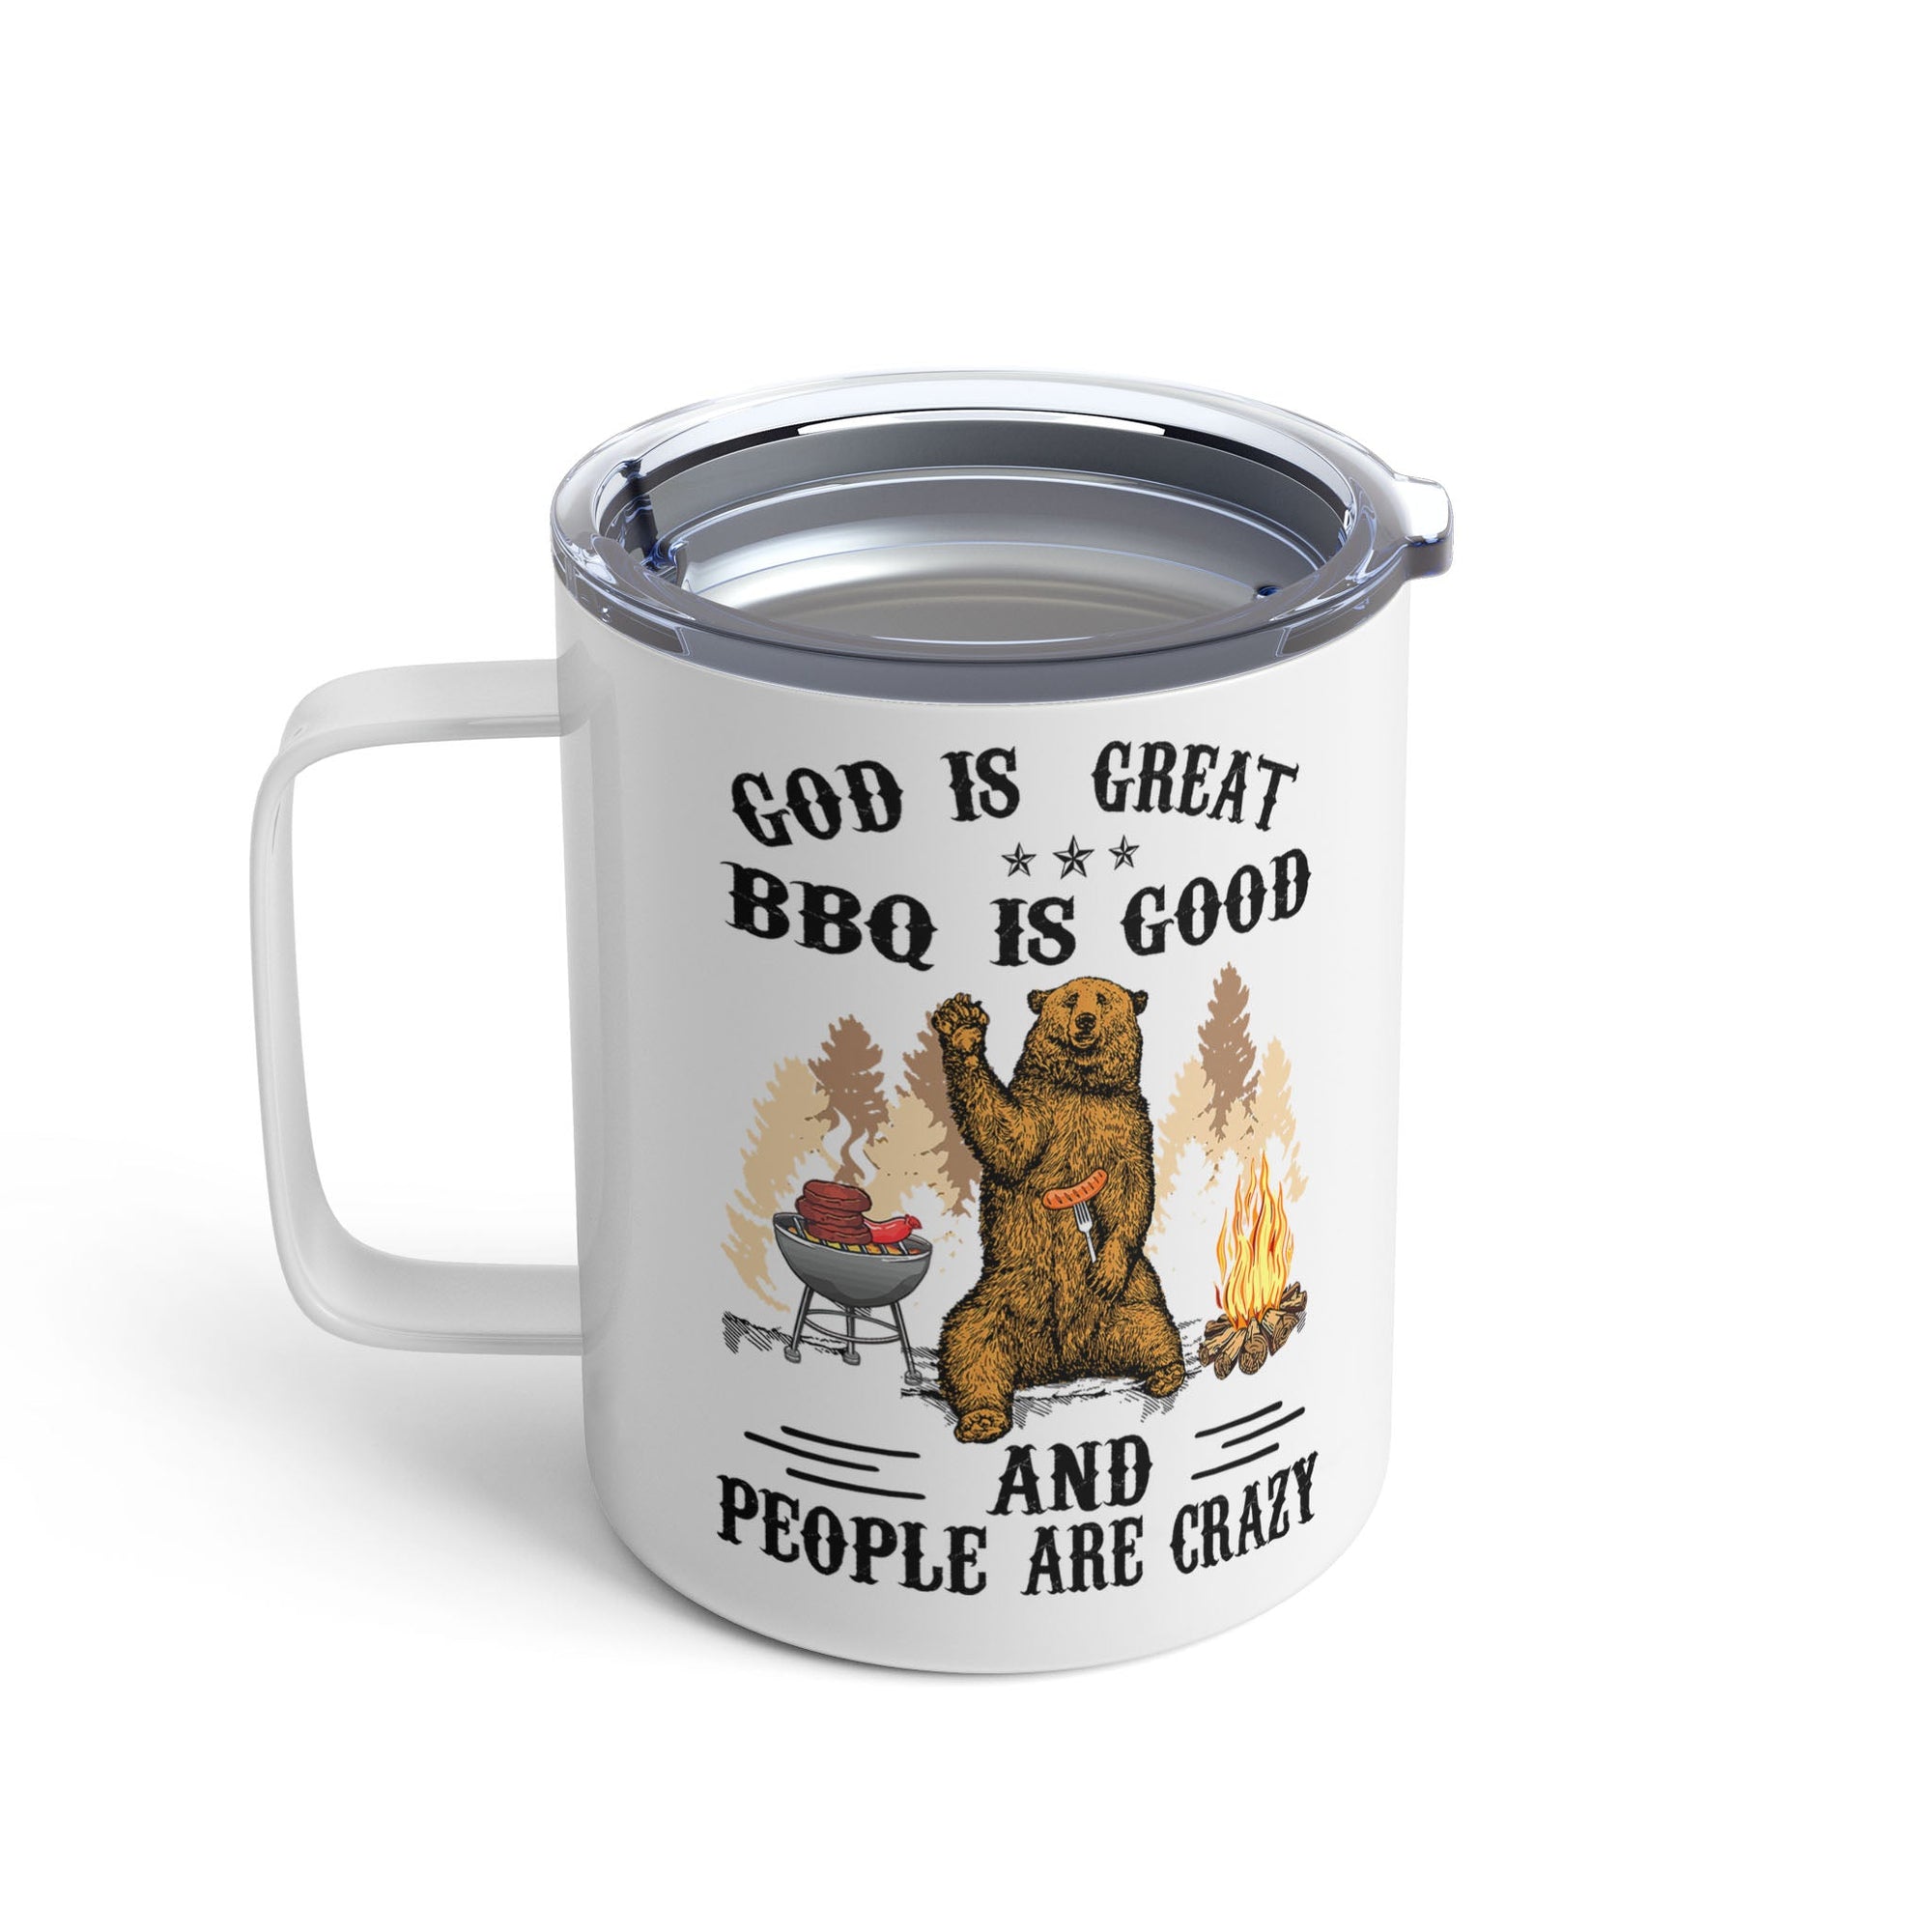 God is great bbq is good and people are crazy Insulated Mug